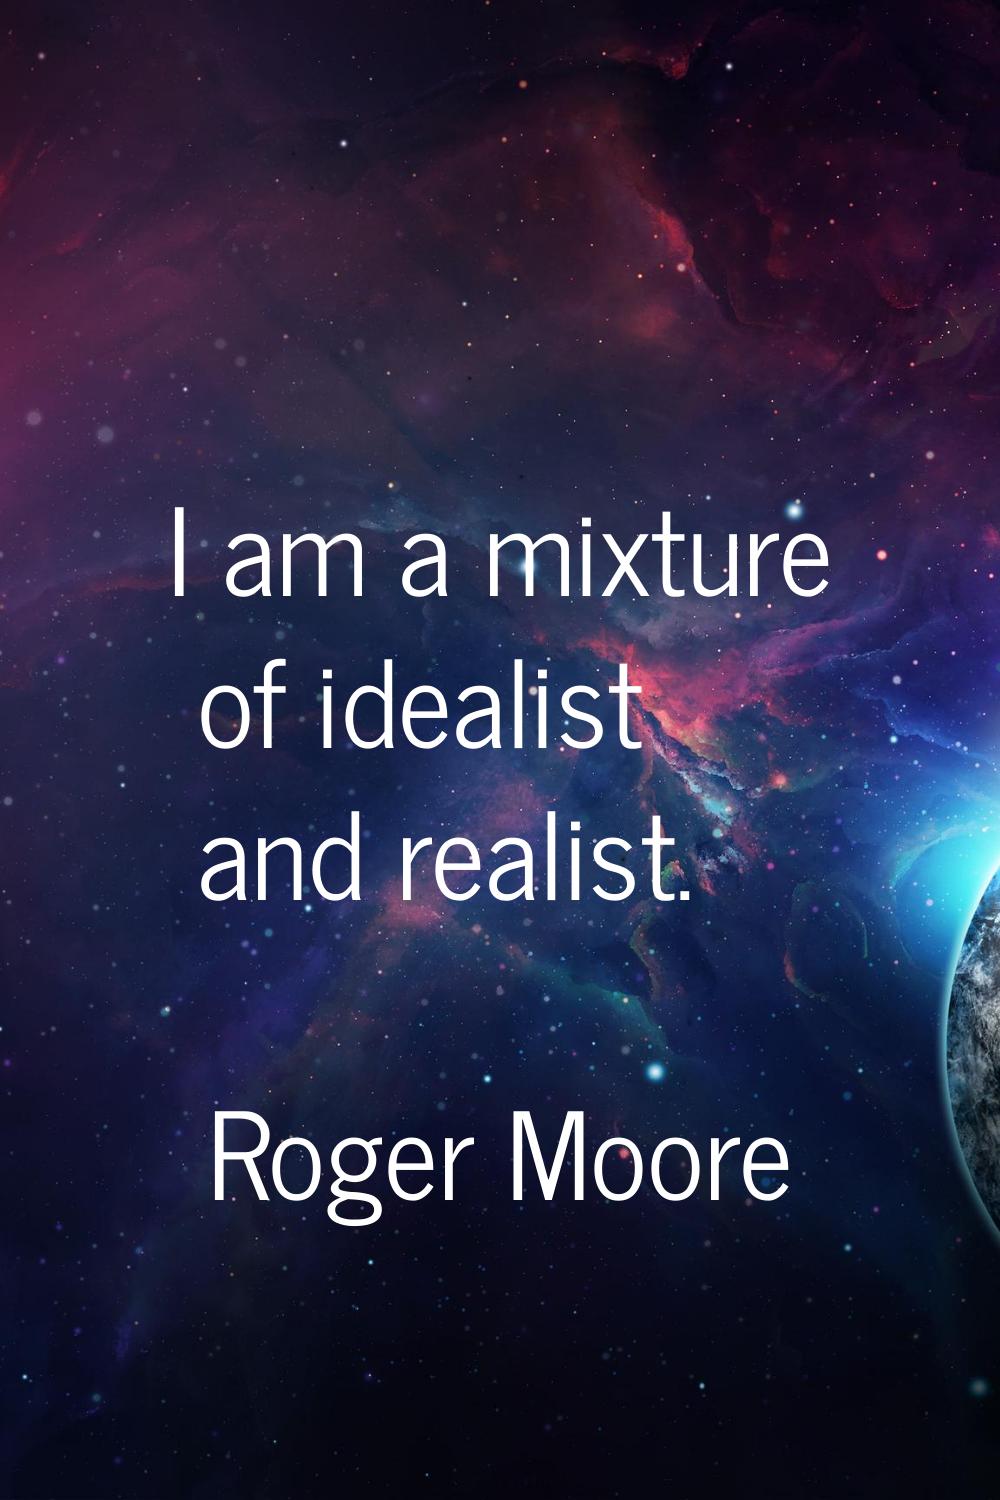 I am a mixture of idealist and realist.